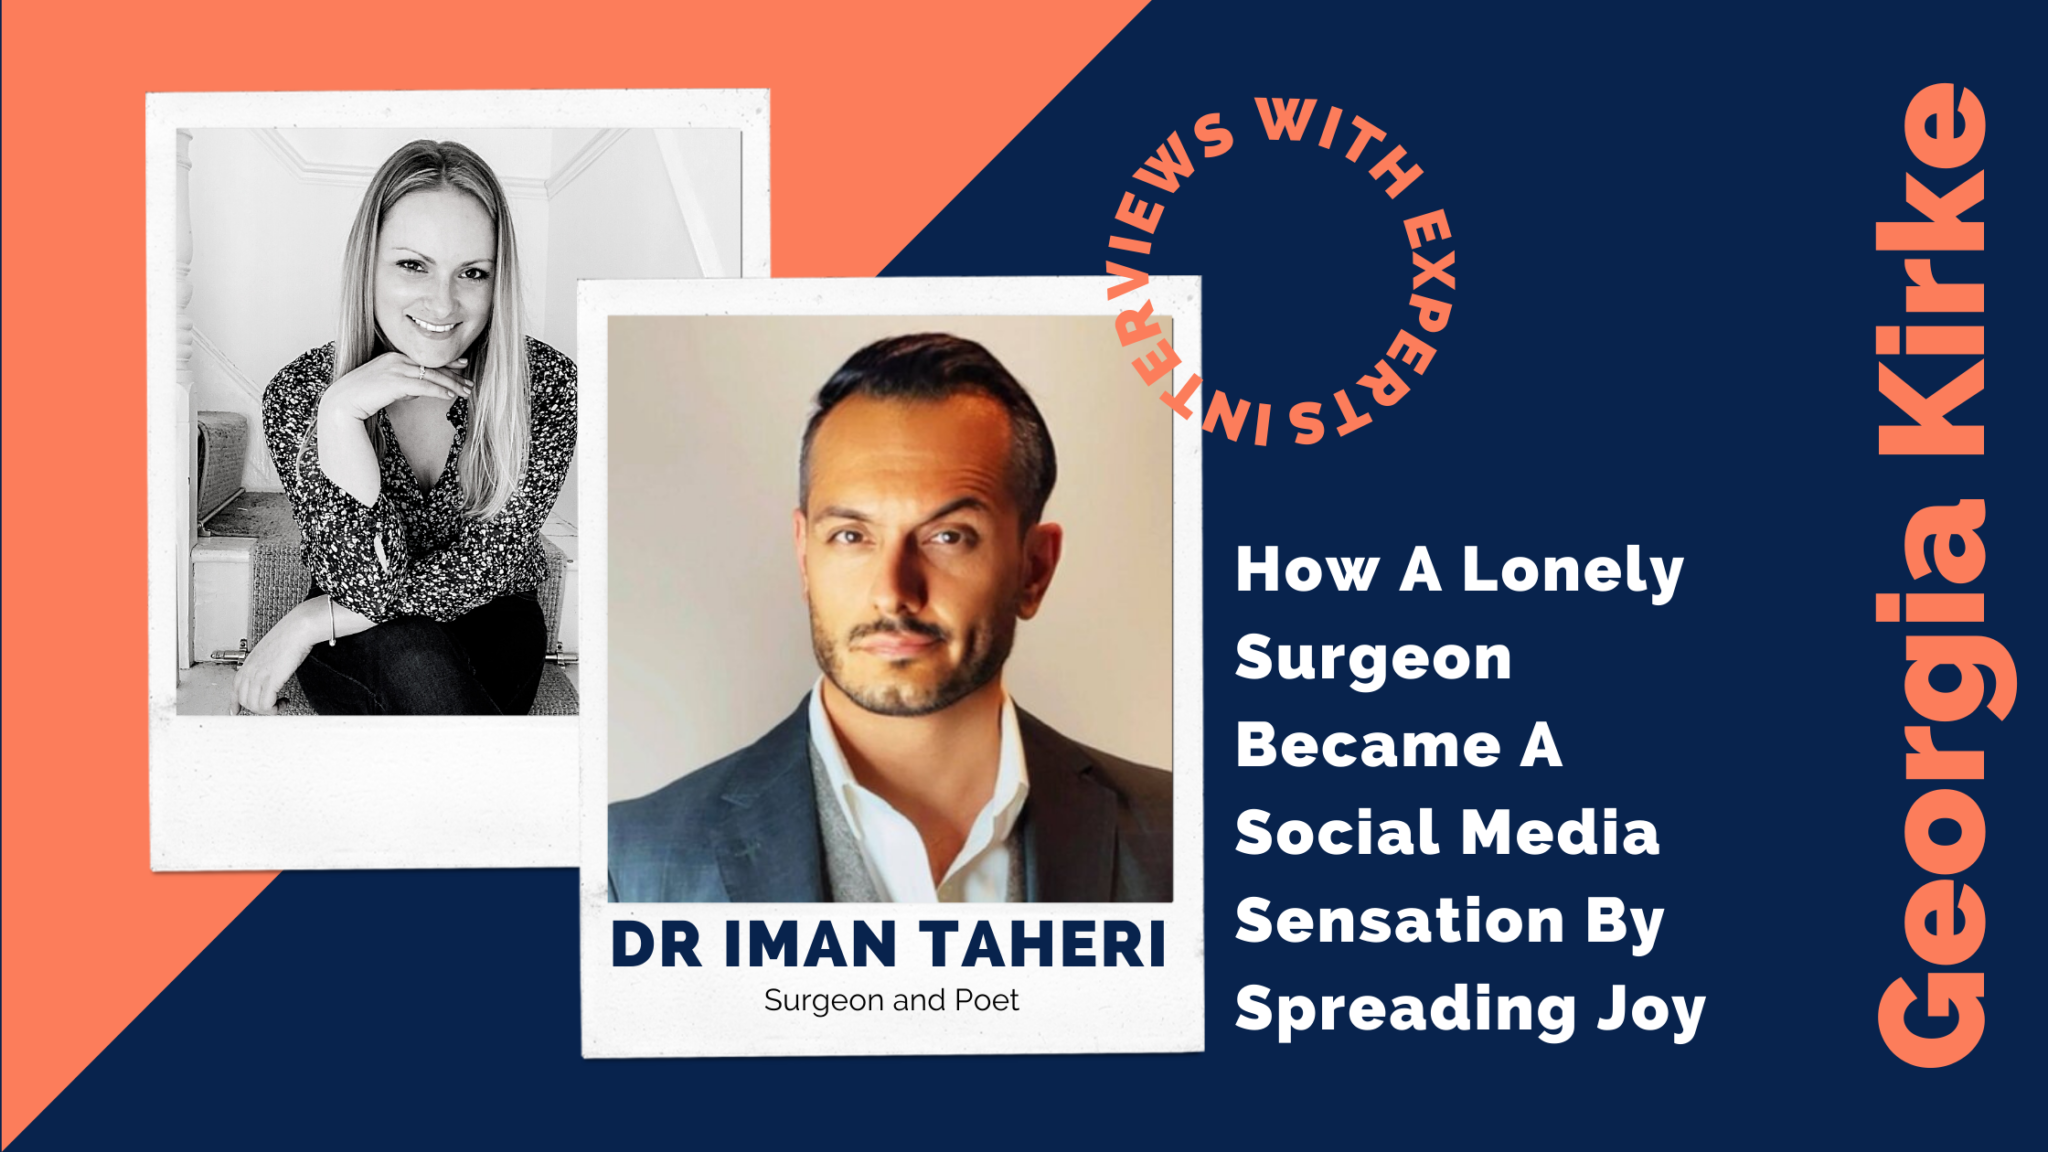 How A Lonely Surgeon Became A Social Media Sensation By Spreading Joy By Georgia Kirke And Special Guest Dr Iman Taheri